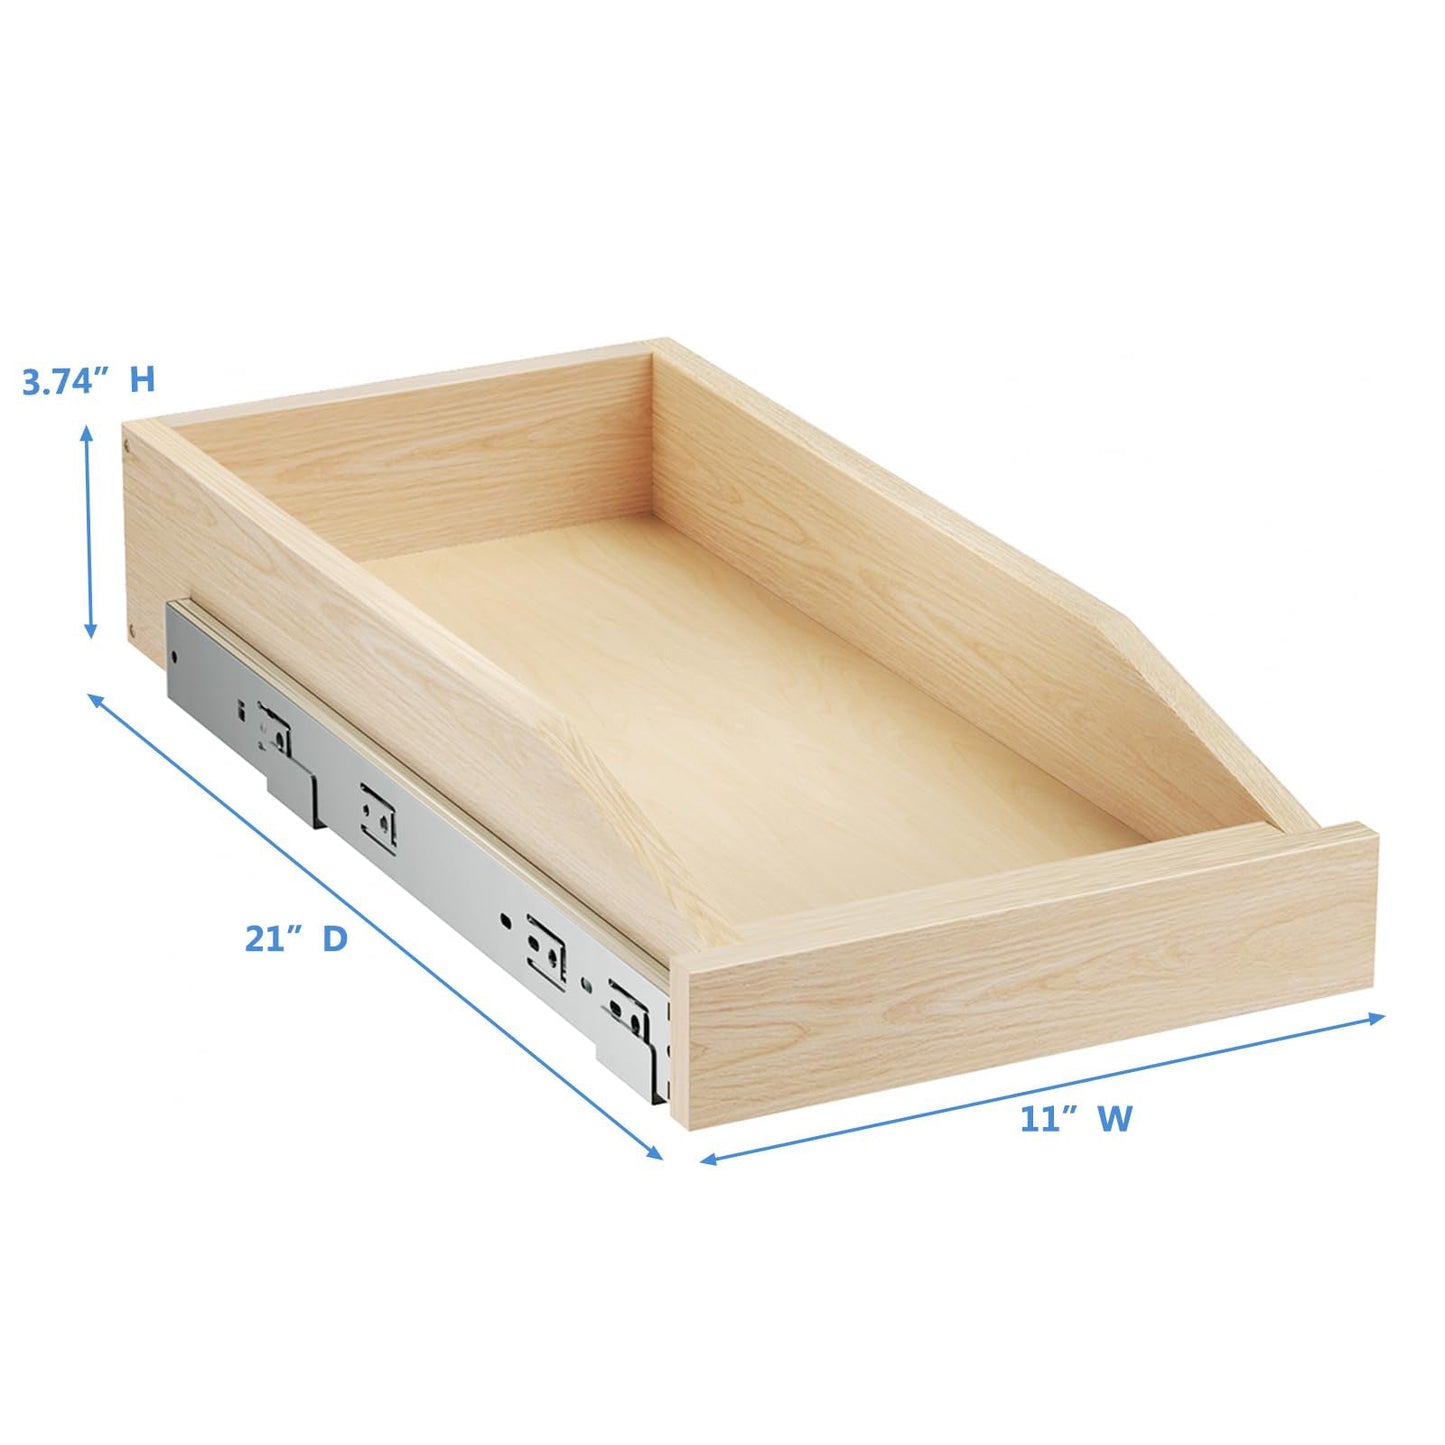 Single Original Wood Pull Out Drawers For Kitchen Cabinets